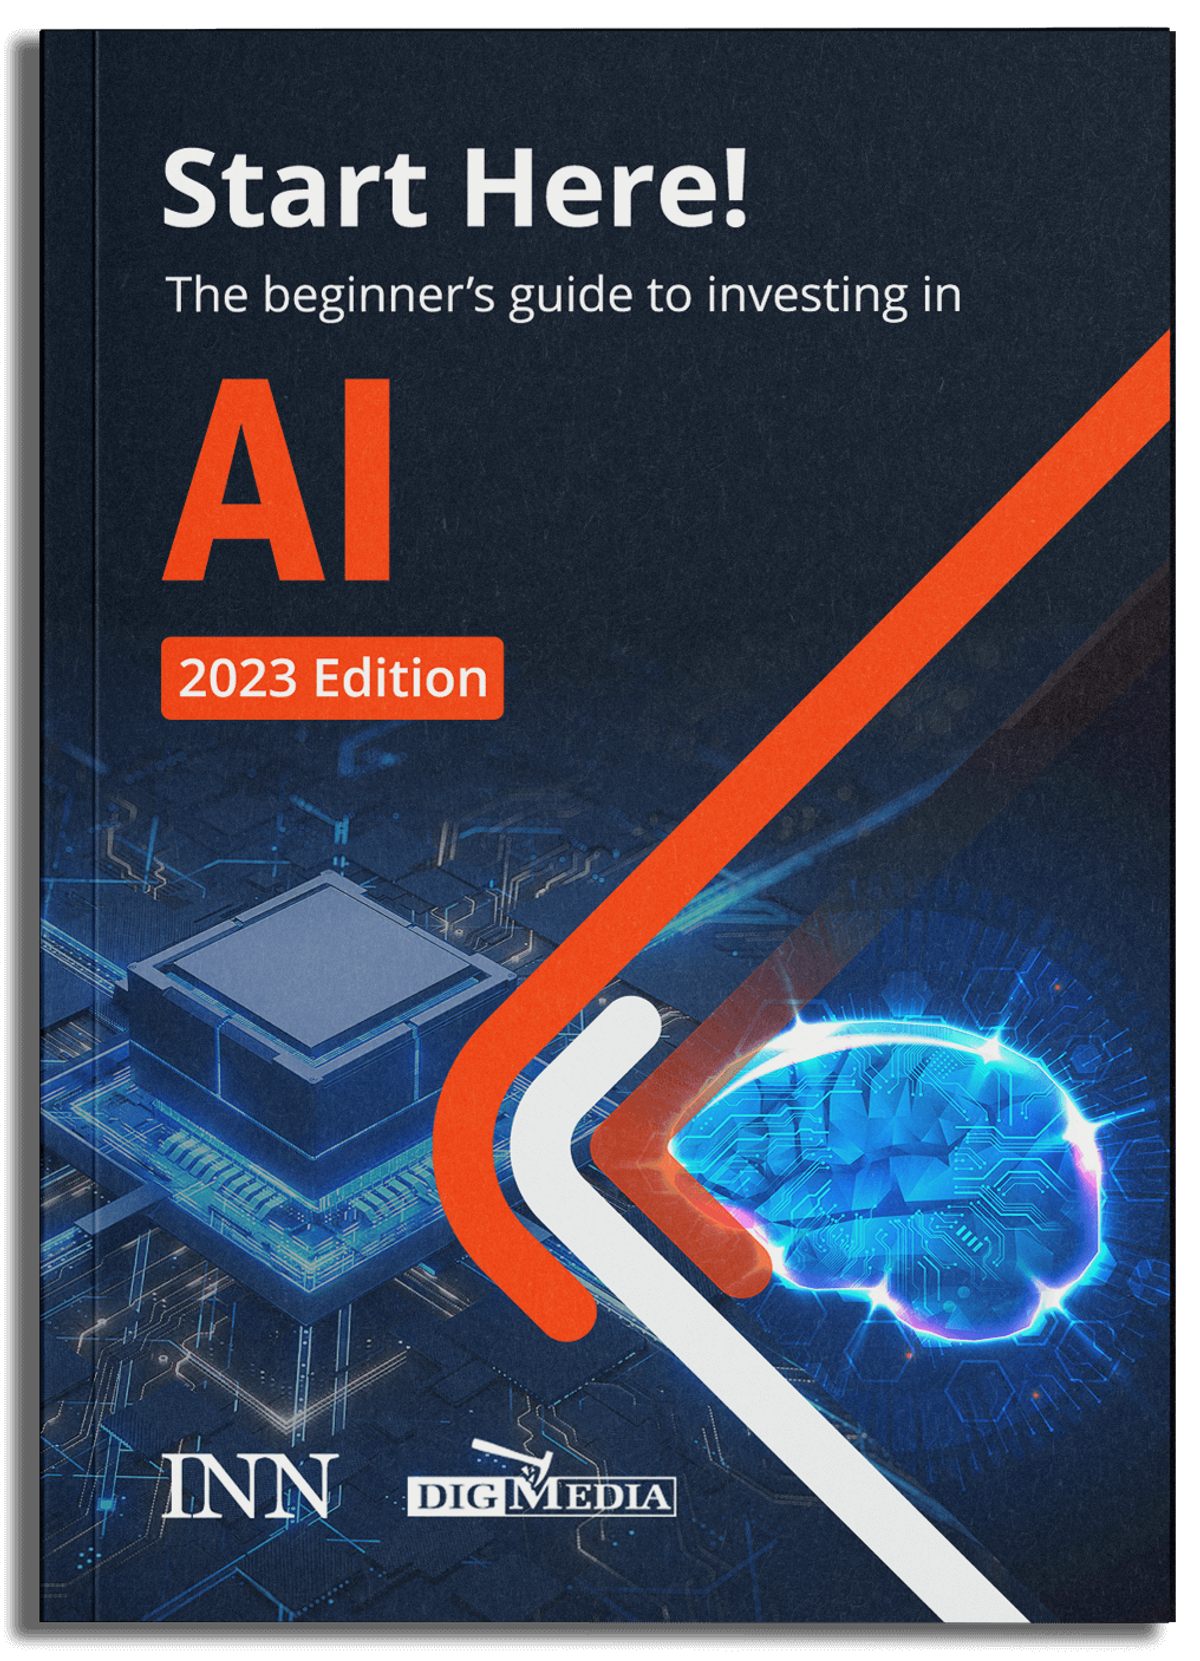 How to Invest in AI (2023 Edition)